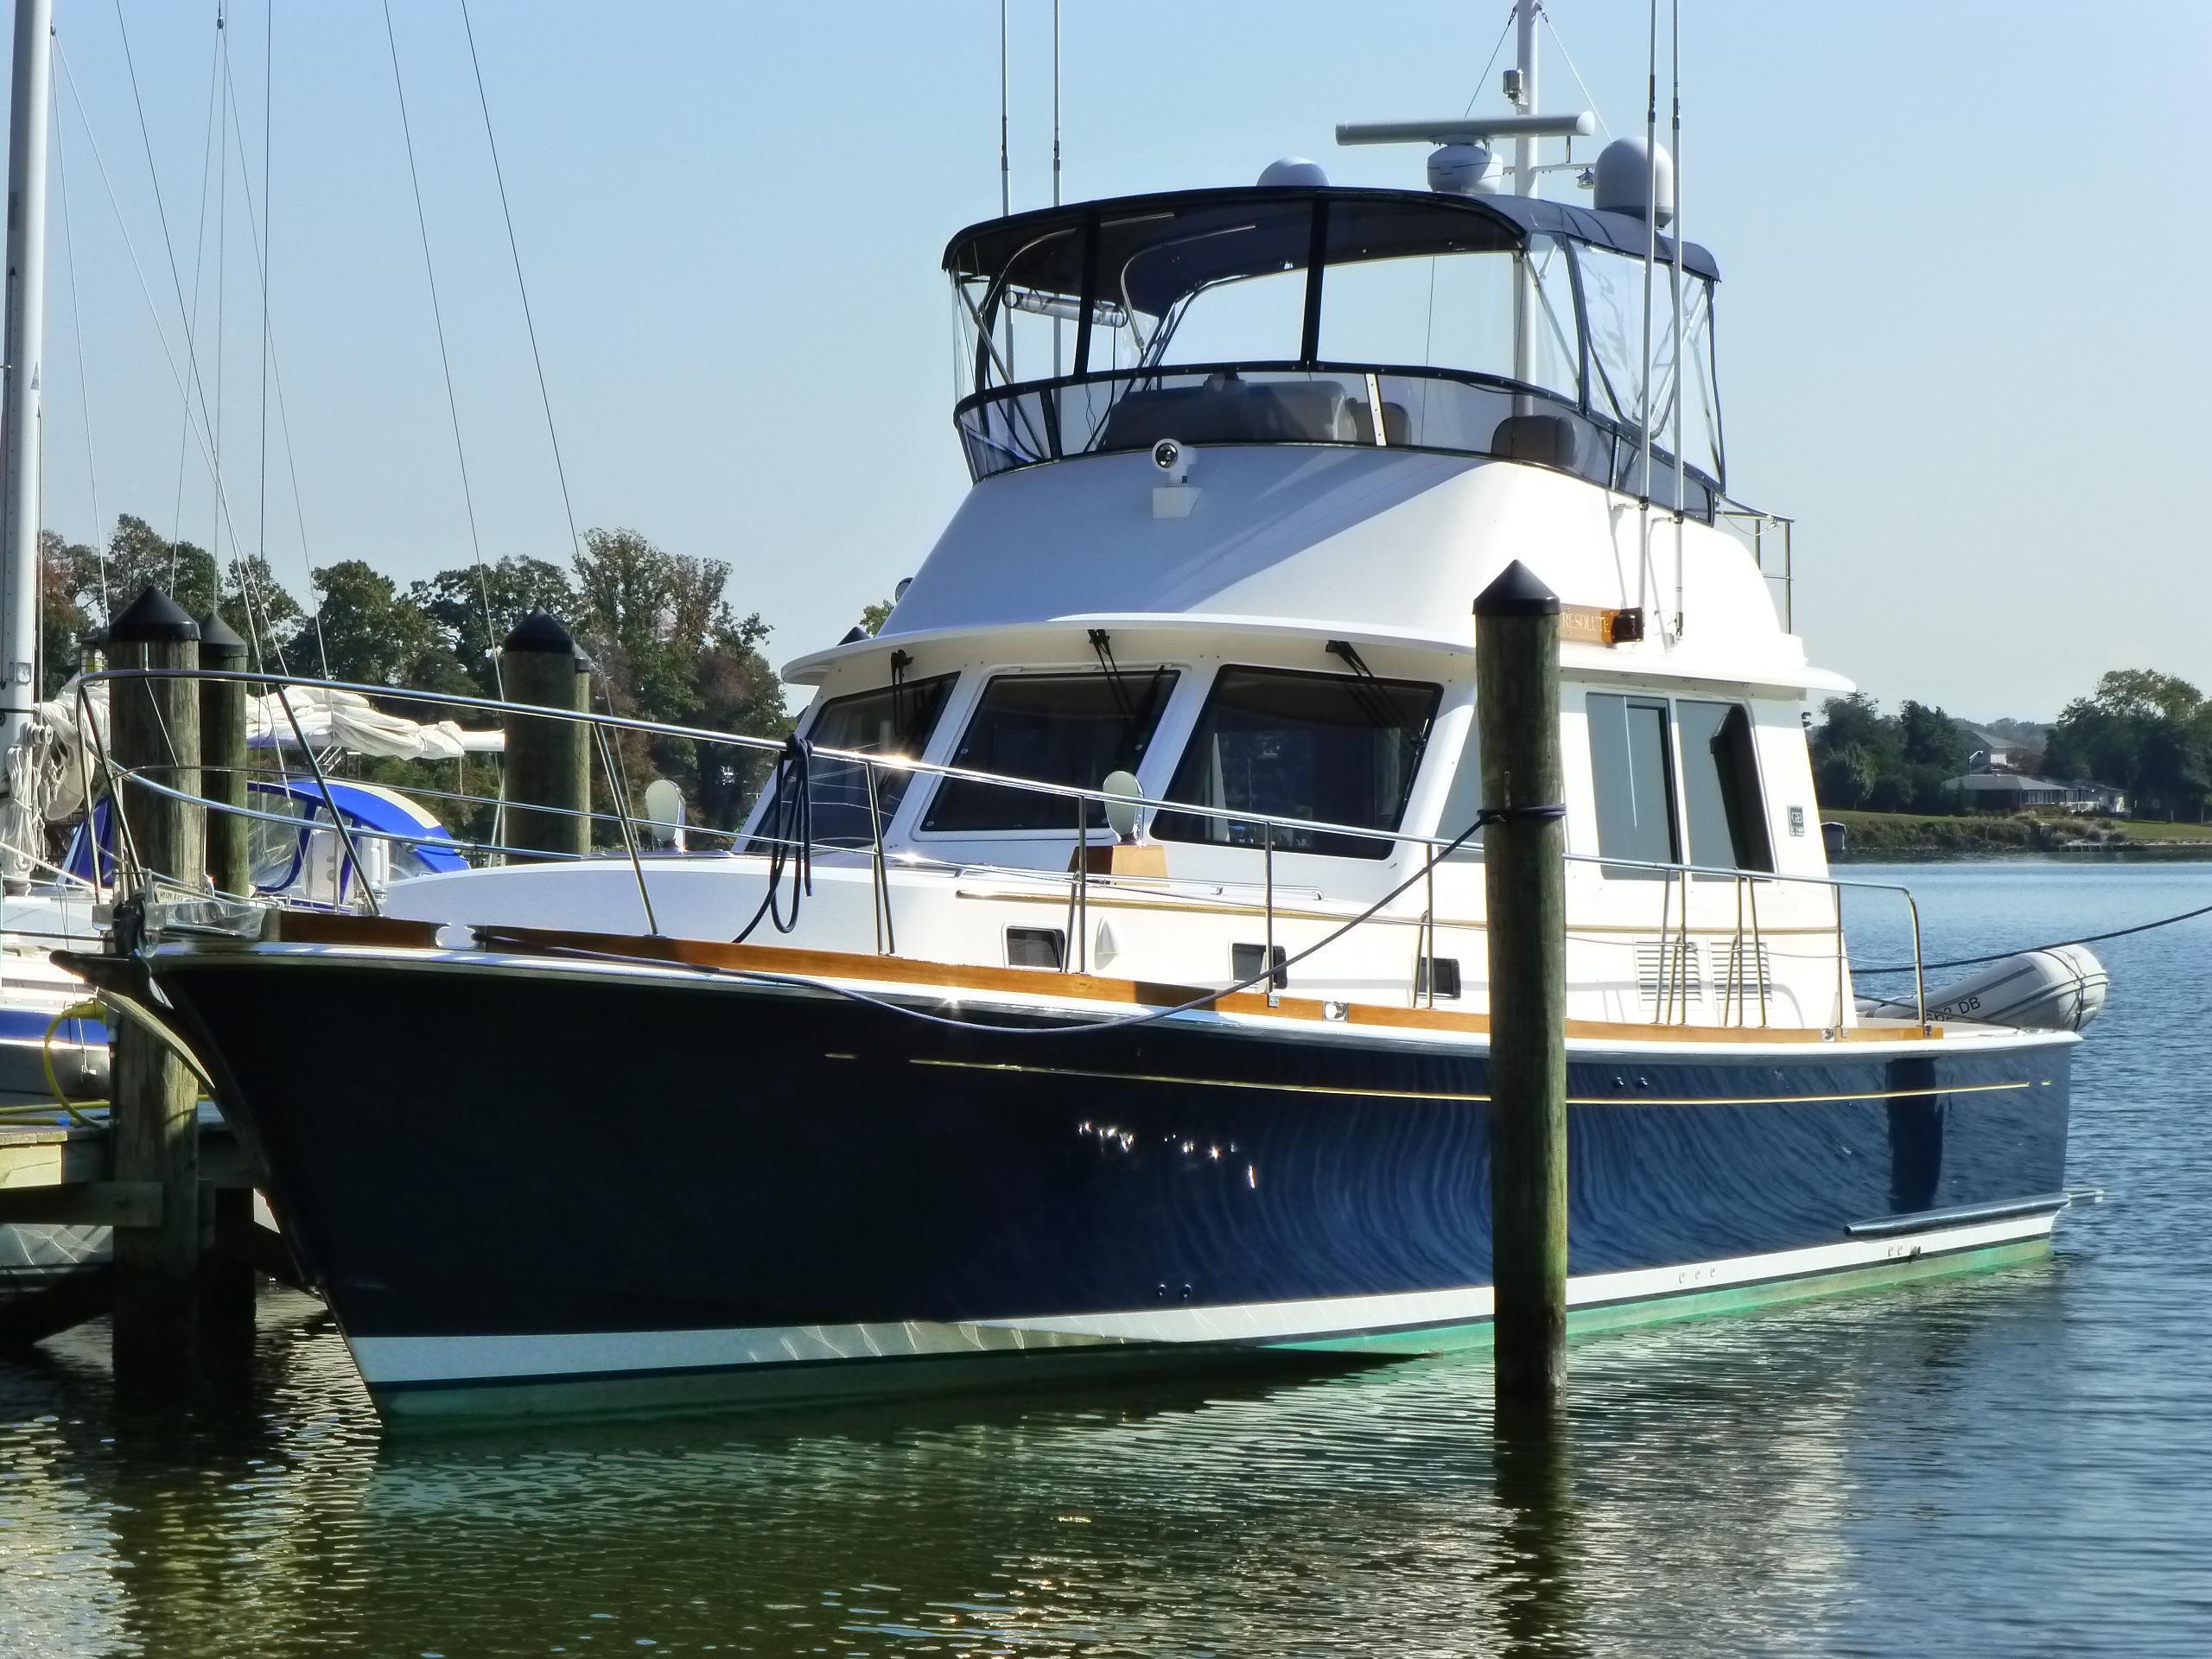 Grand Banks Eastbay Flybridge, On Land @ Smith's Marina in Crownsville/Annapolis